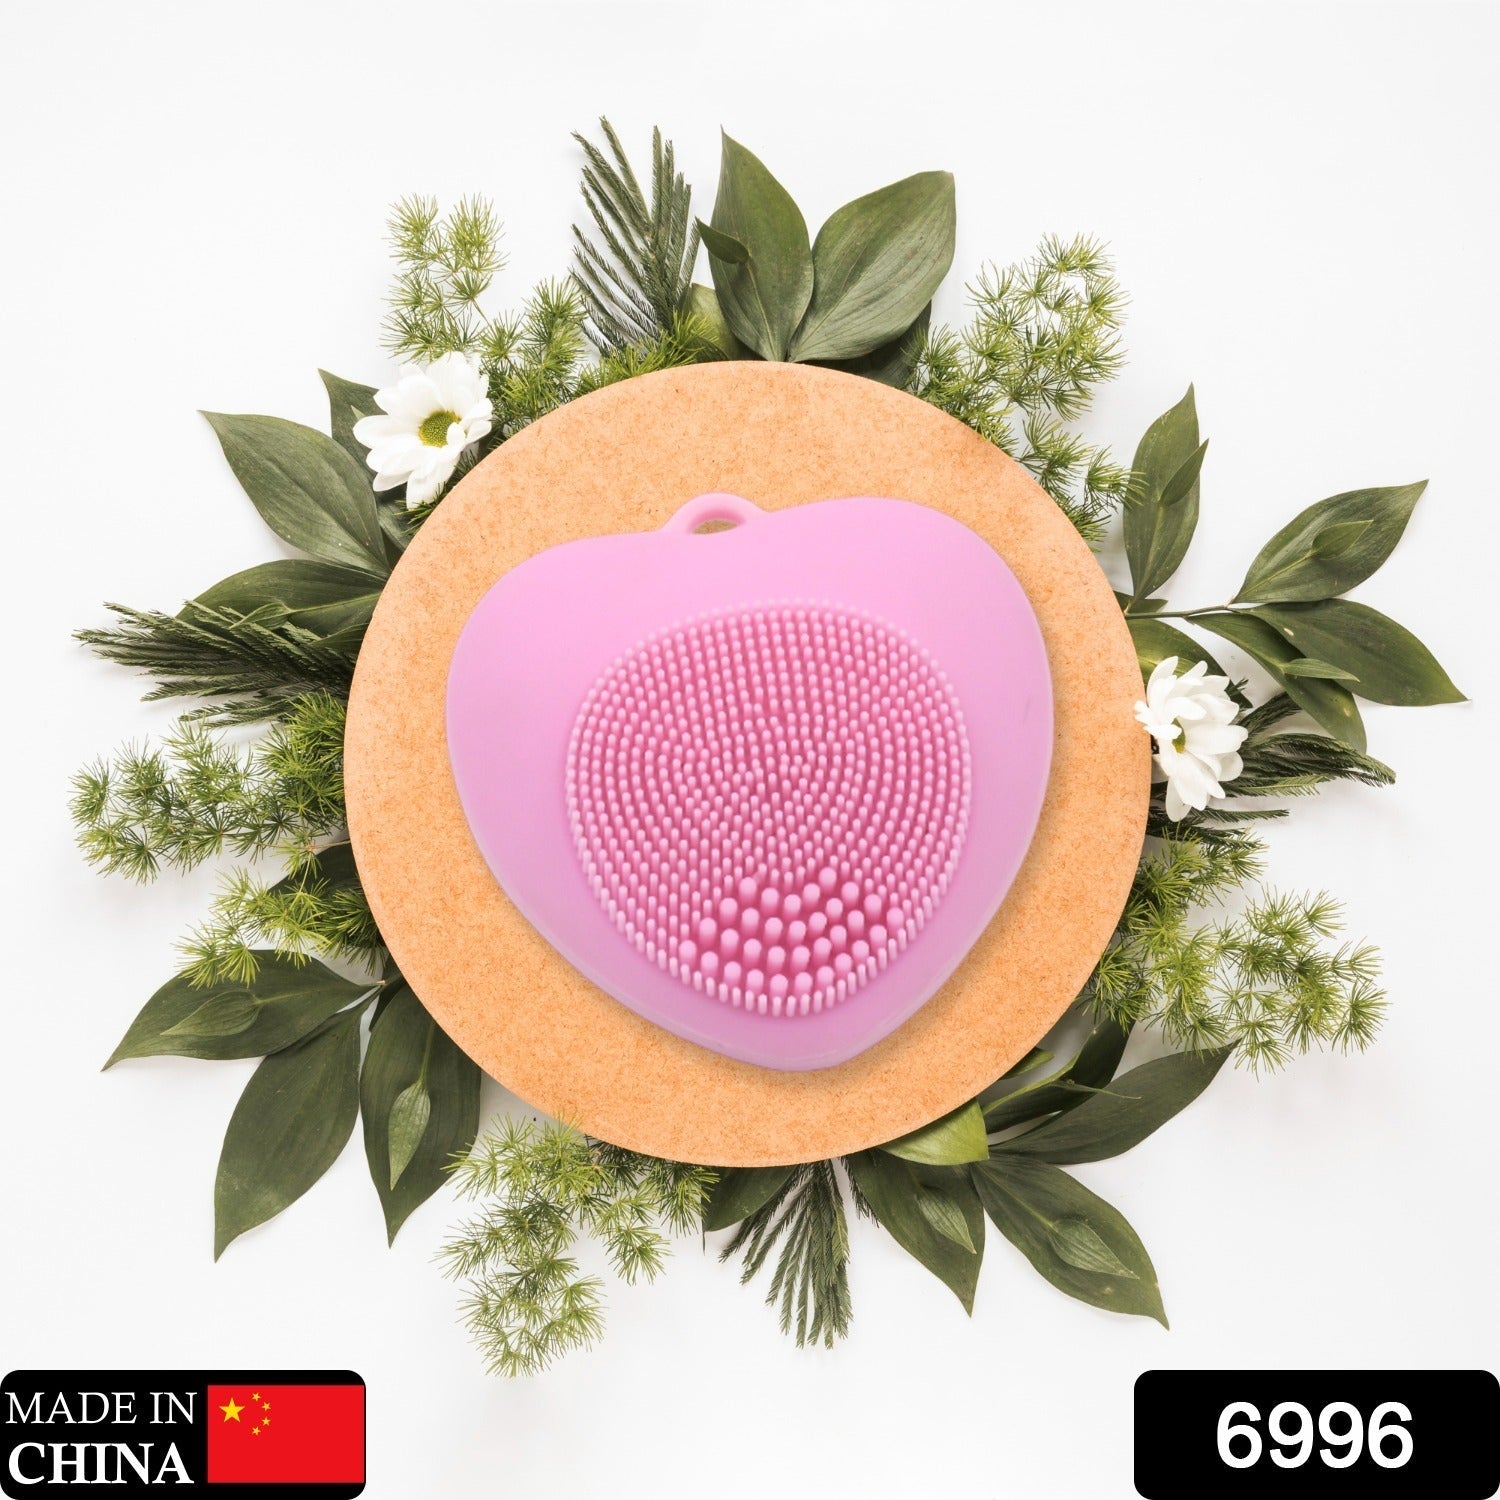 6996 Waterproof Face Wash Brush, Face Scrubber Facial Cleansing Brush Exfoliating Silicone Face Hot Compress Scrubber Cleaning, for Deep Skin Care Heart Shaped, for Women for Home